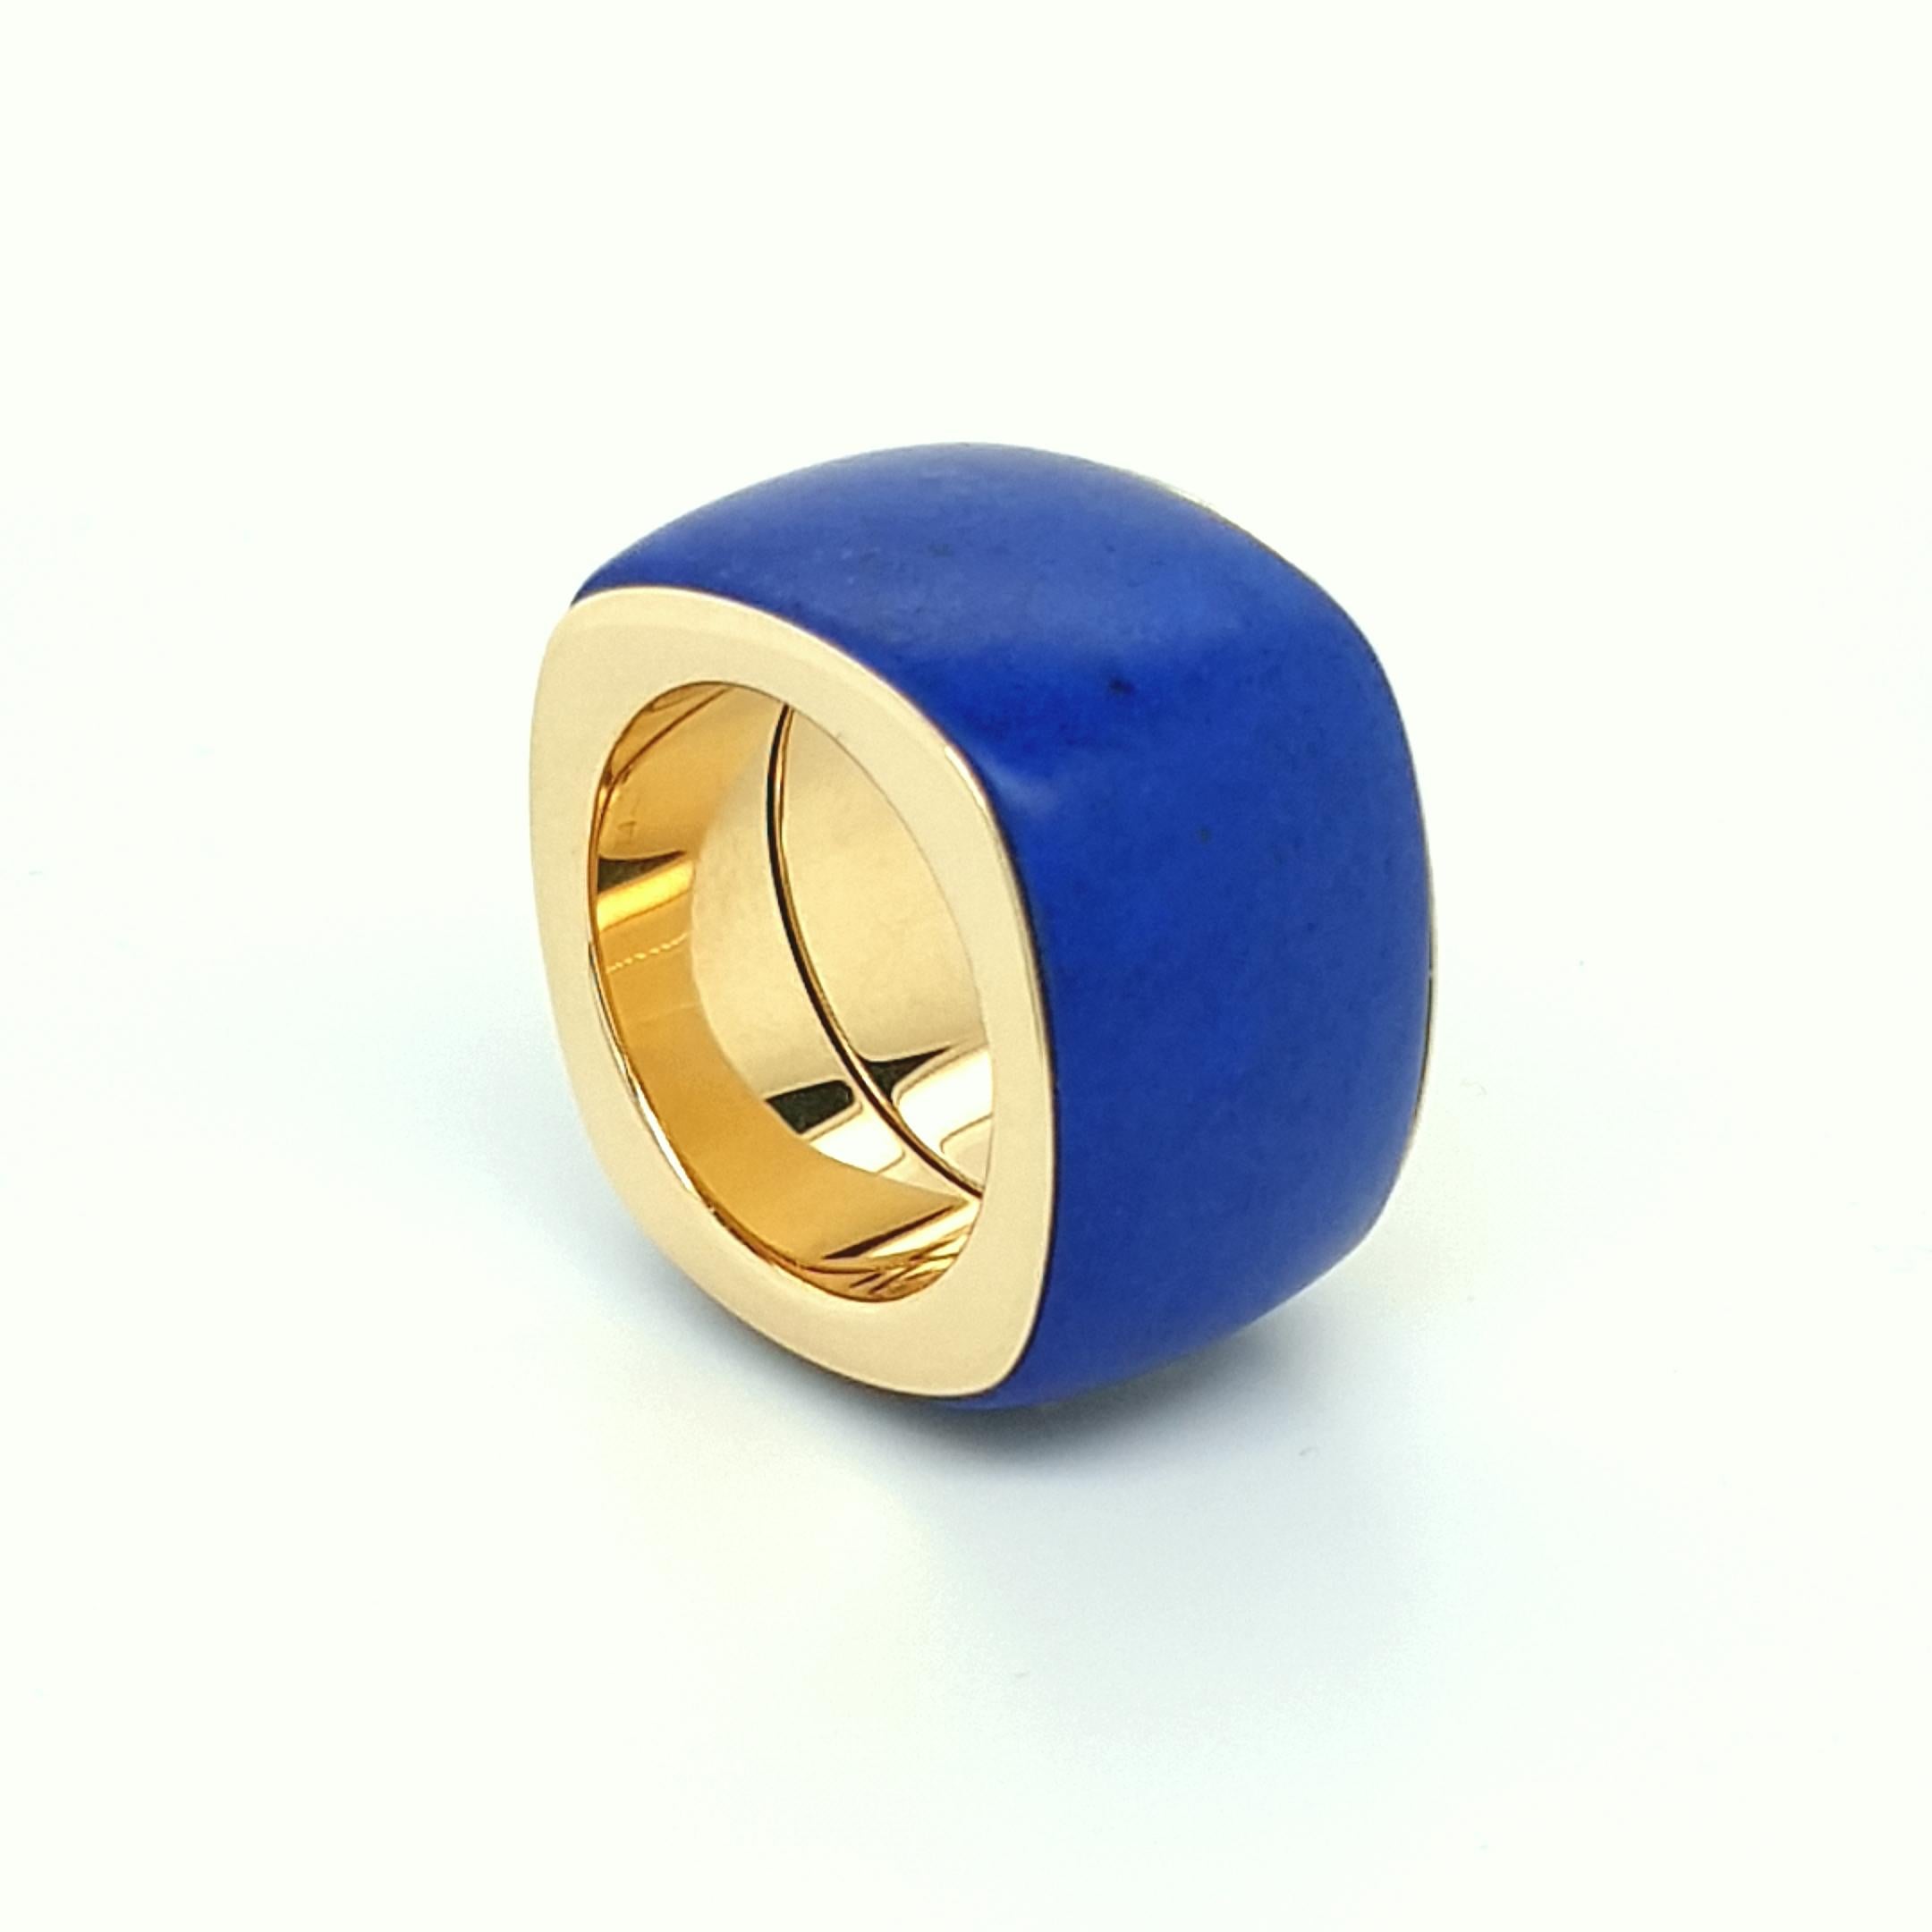 This semi-polished Royal Blue AAA Lapis Lazuli Ring with 18 Carat Yellow Gold is totally handmade.
Cutting as well as goldwork are made in German quality.
Finding a suitable nice Royal Blue Lapis Lazuli to cut a whole ring out of one piece is very